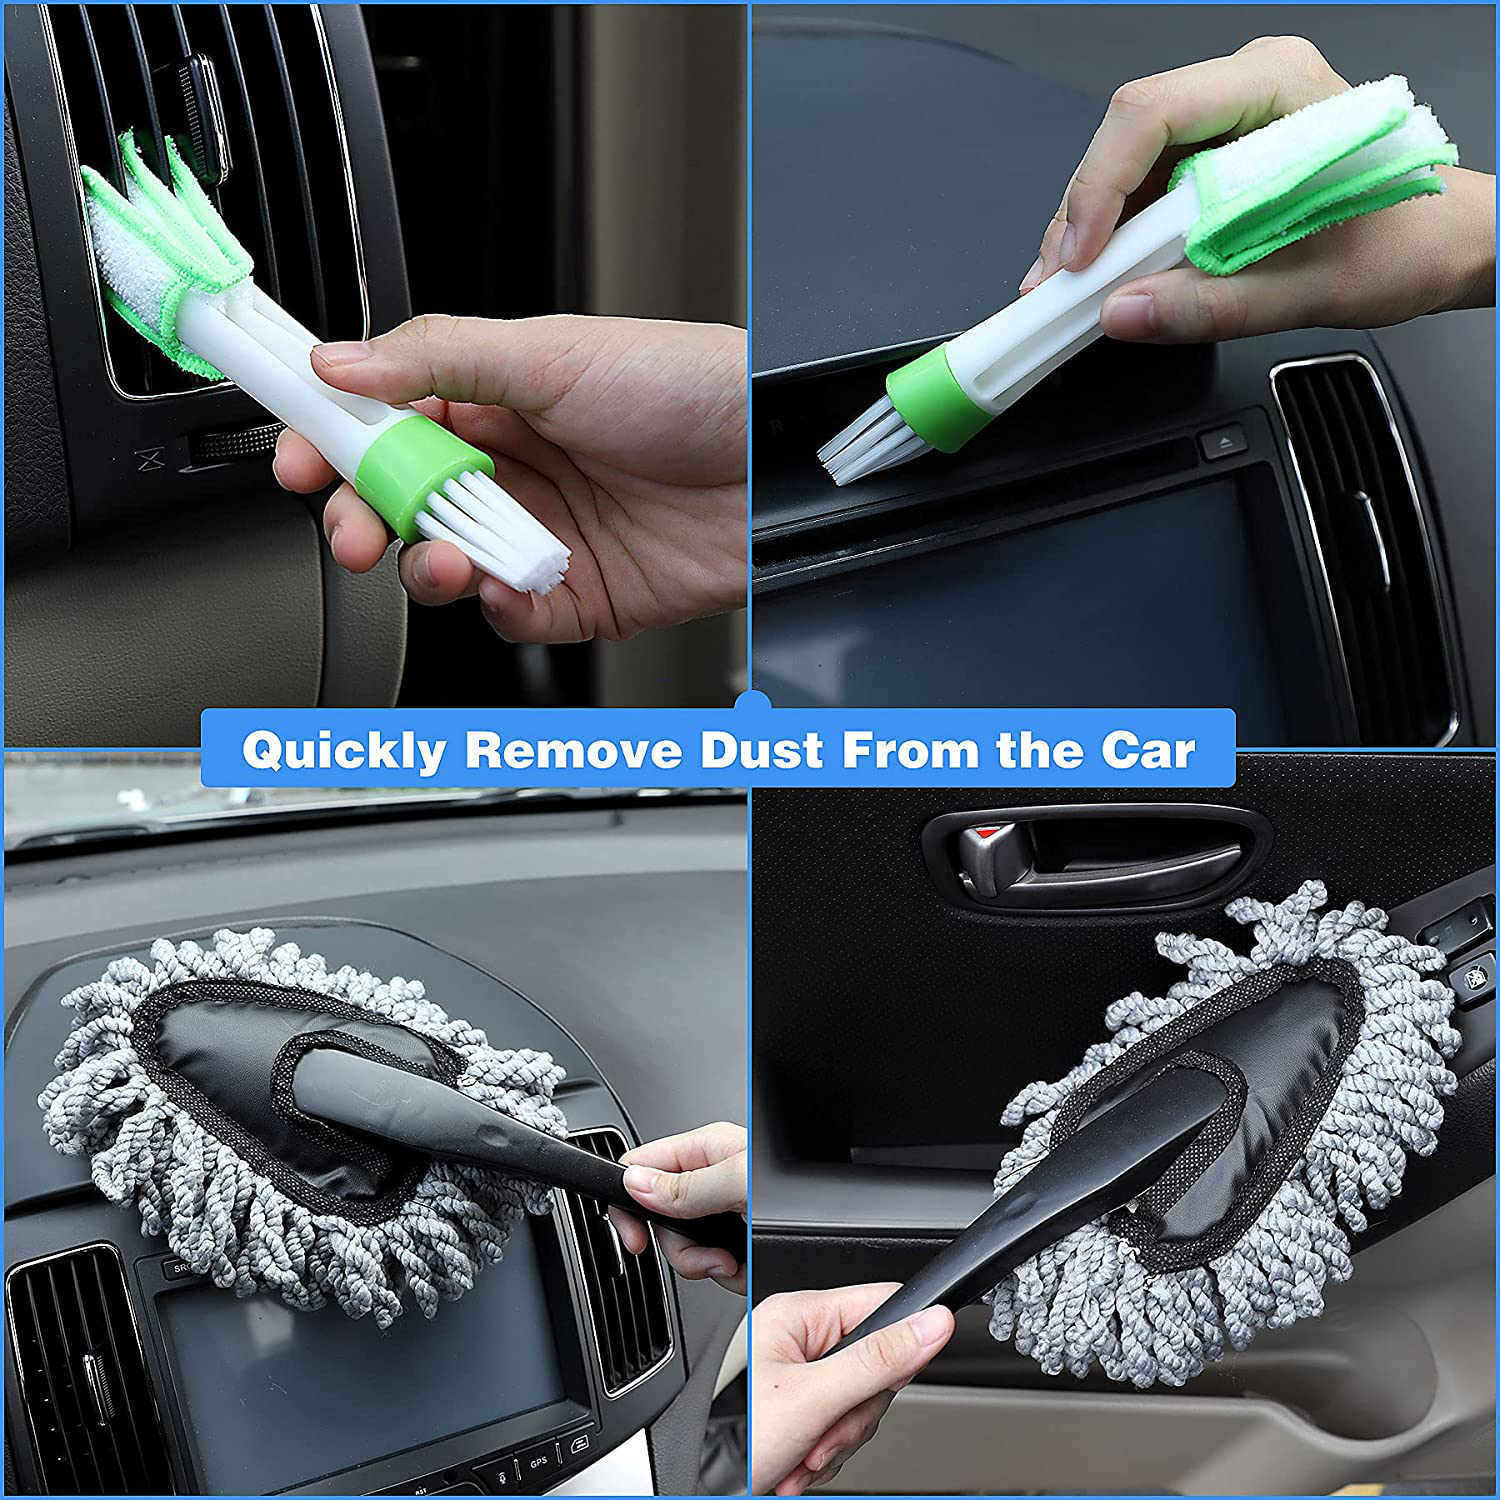 GIVIGO Car Wash Kit 16 Pcs Car Cleaning Kit with Softer Microfiber Cleaning Cloth Thicker Box Car Wash Mitt Duster Squeegee Tire Brush Car Detailing Kit Car Wash Cleaning Tools Set for All Surfaces